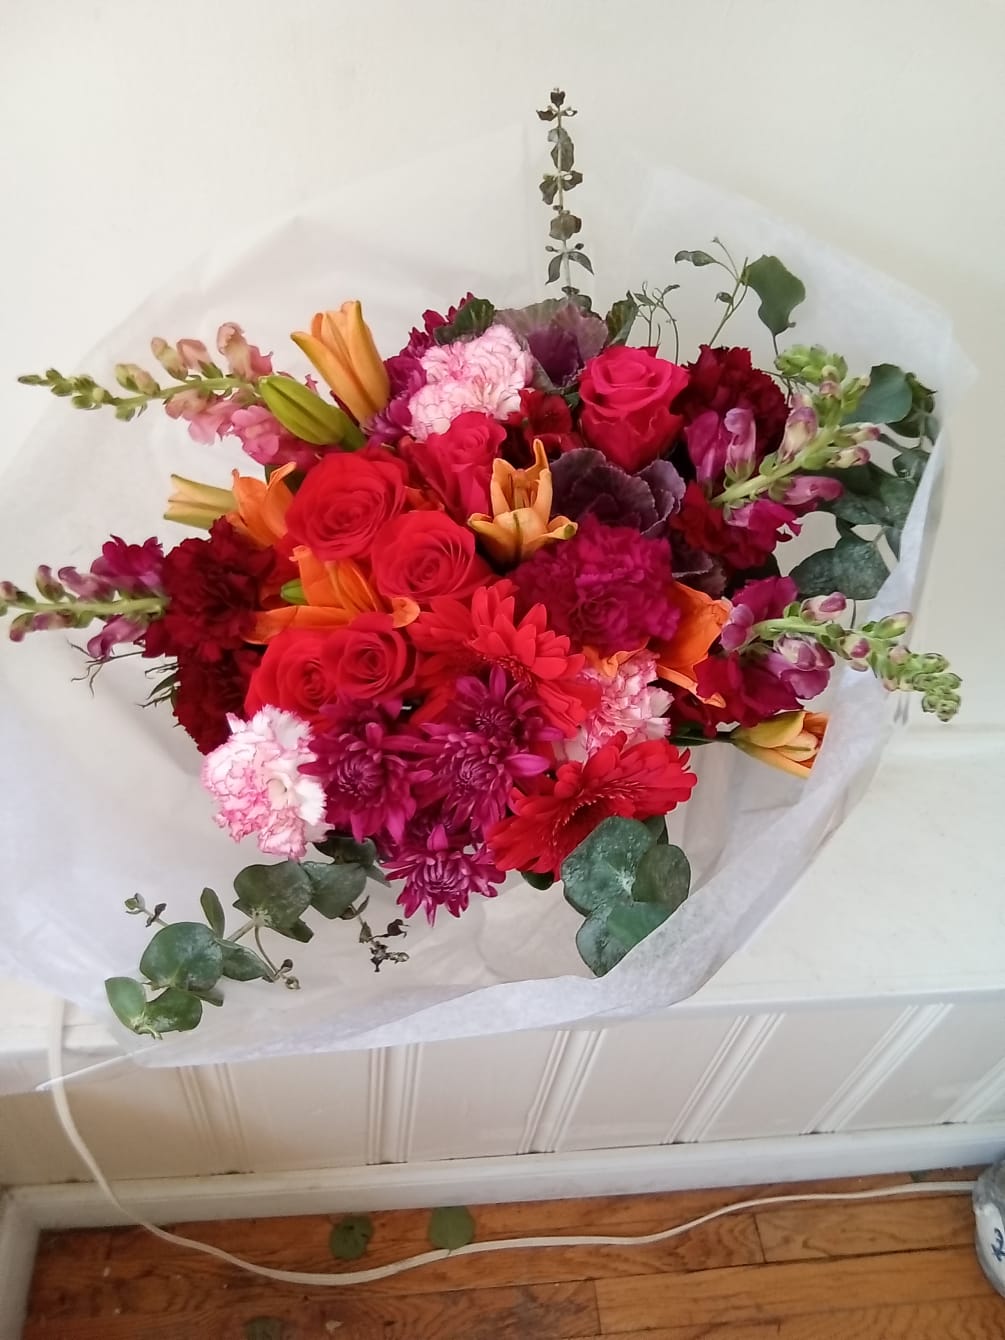 Vibrant red mix of roses, carnations and other flowers wrap